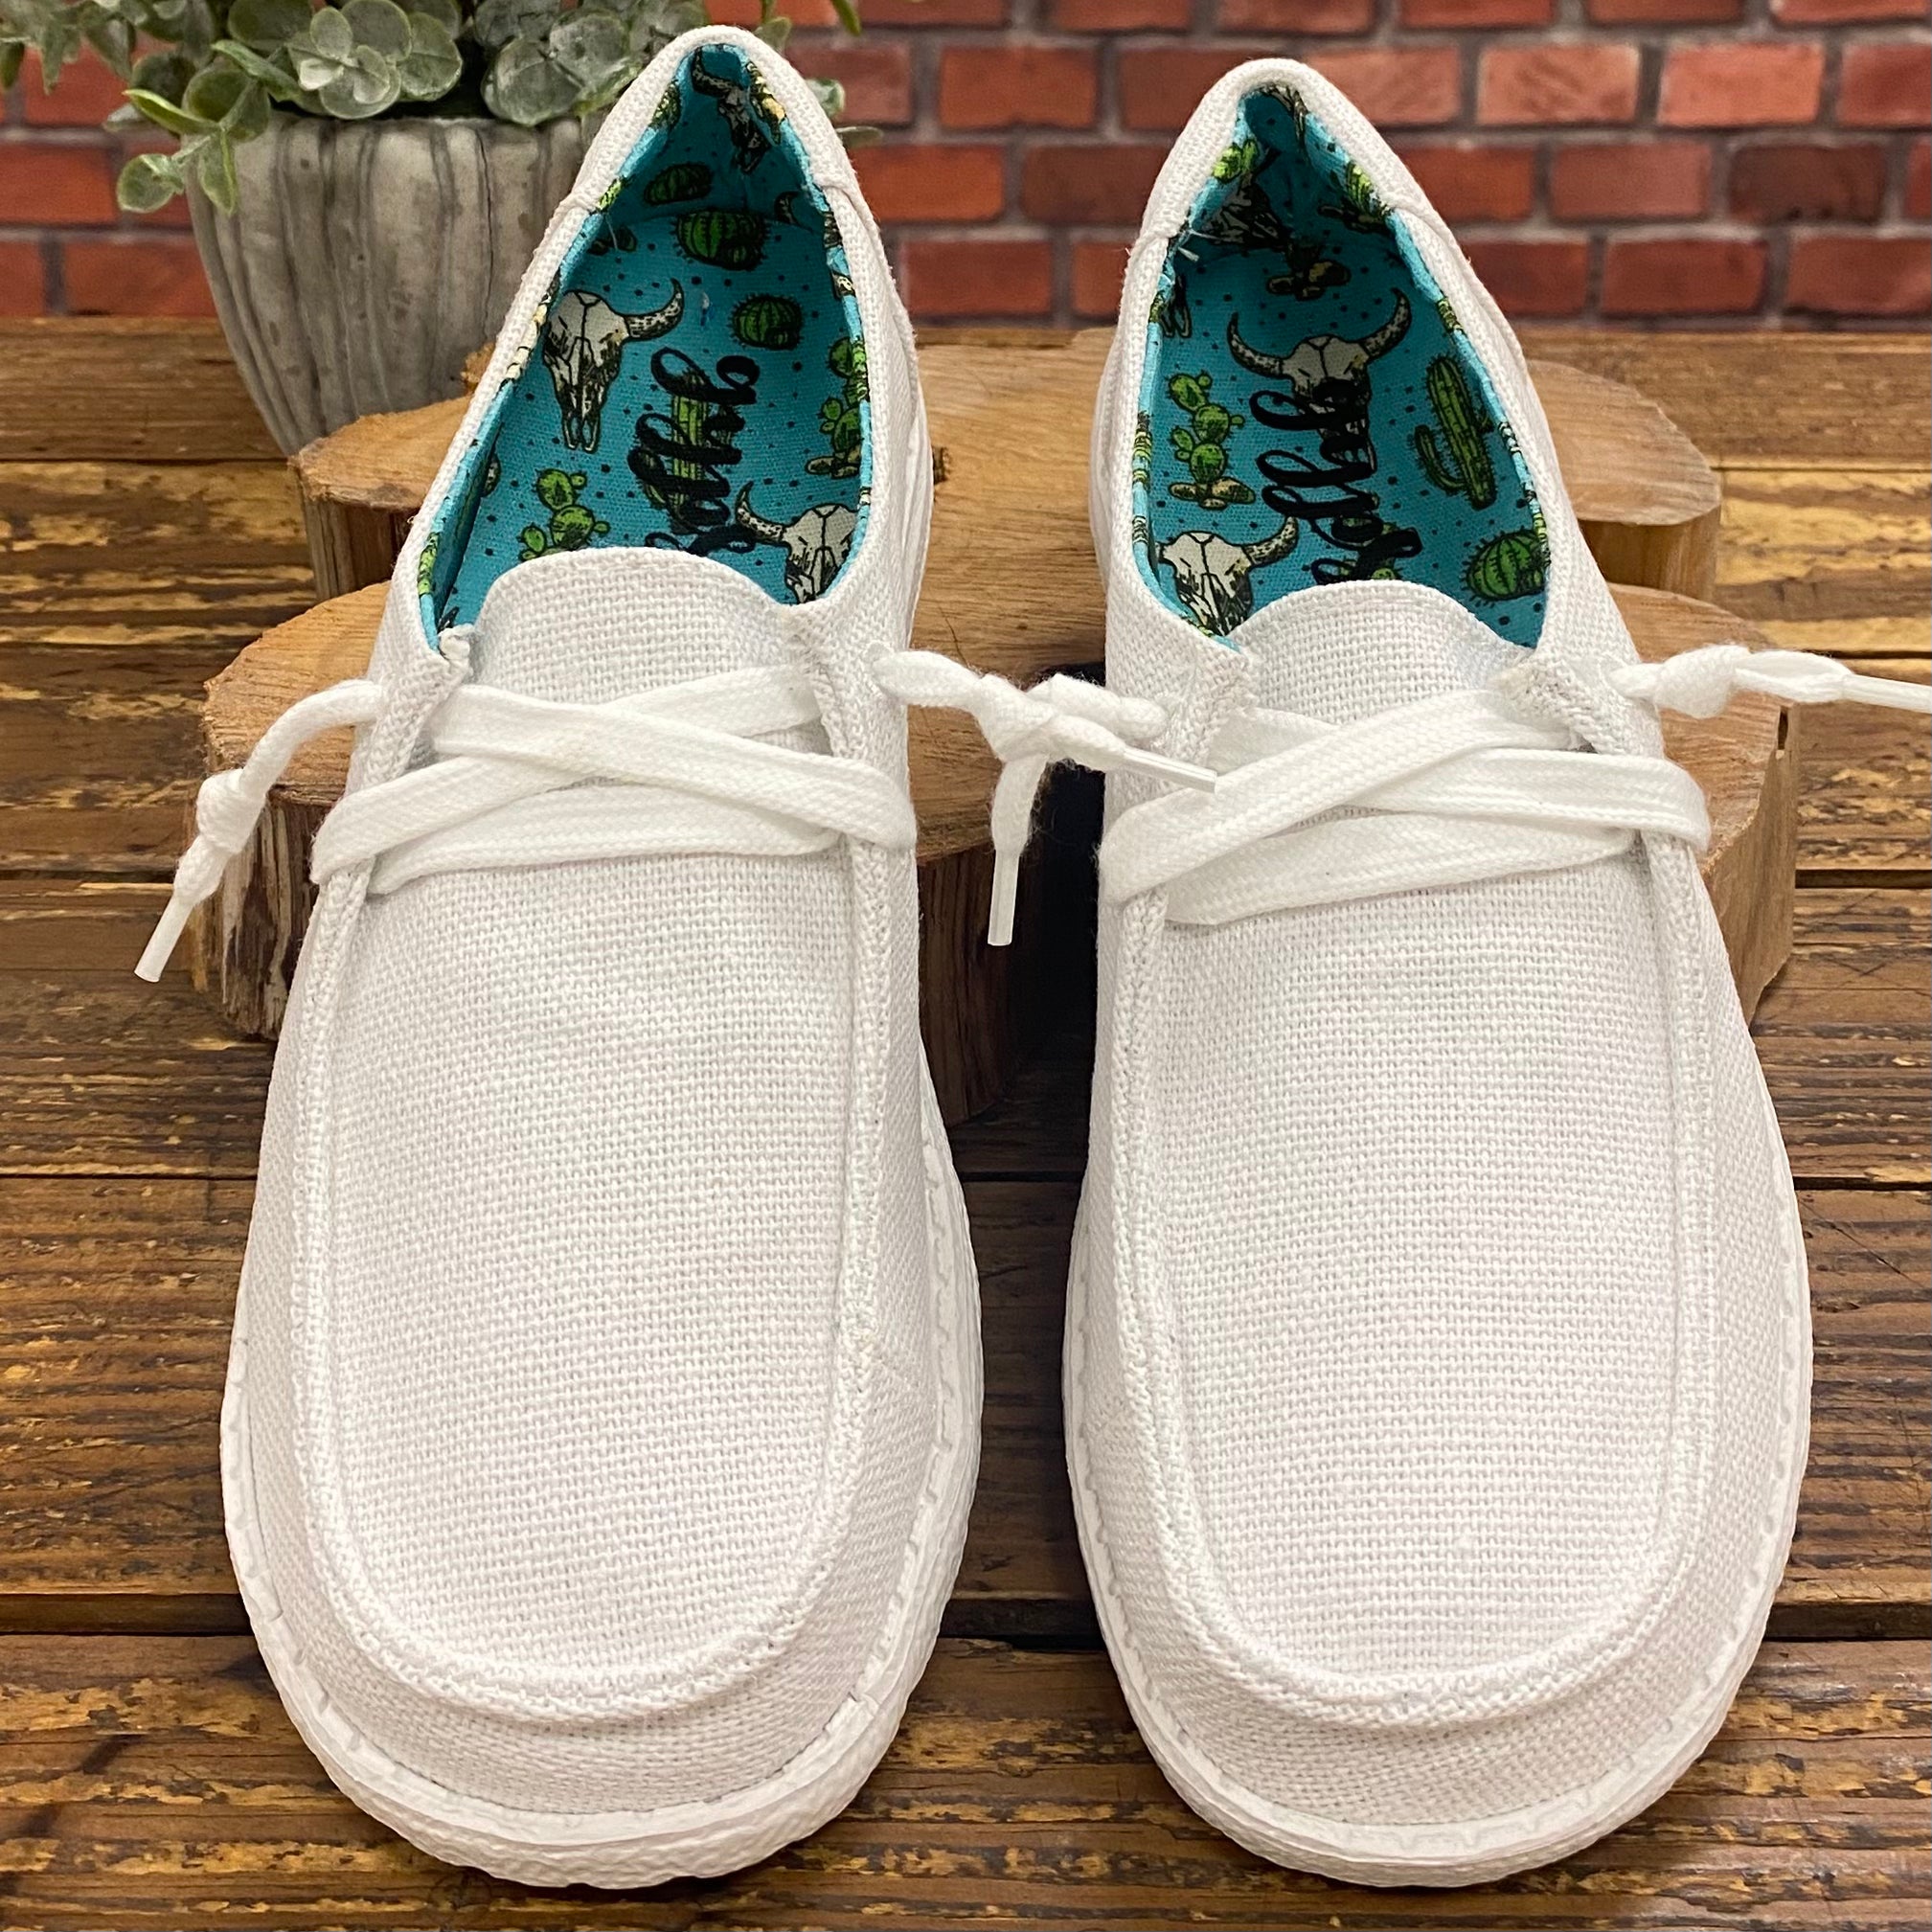 Gypsy Jazz "Holly 5" White Sneakers